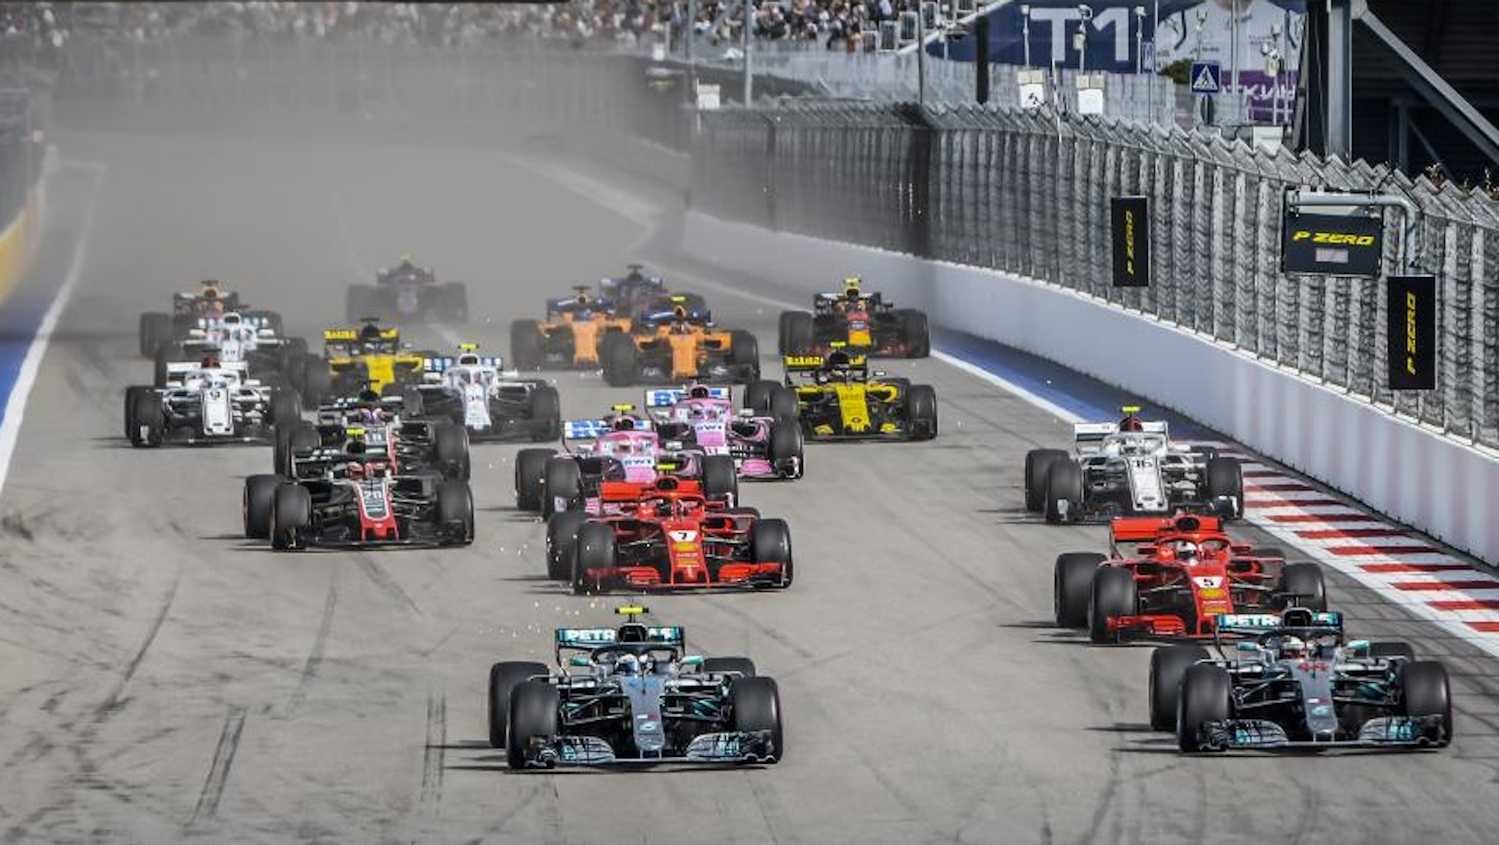 6.49M Estimated Loss From Ticket Sales A Worse-case Scenario For Formula One